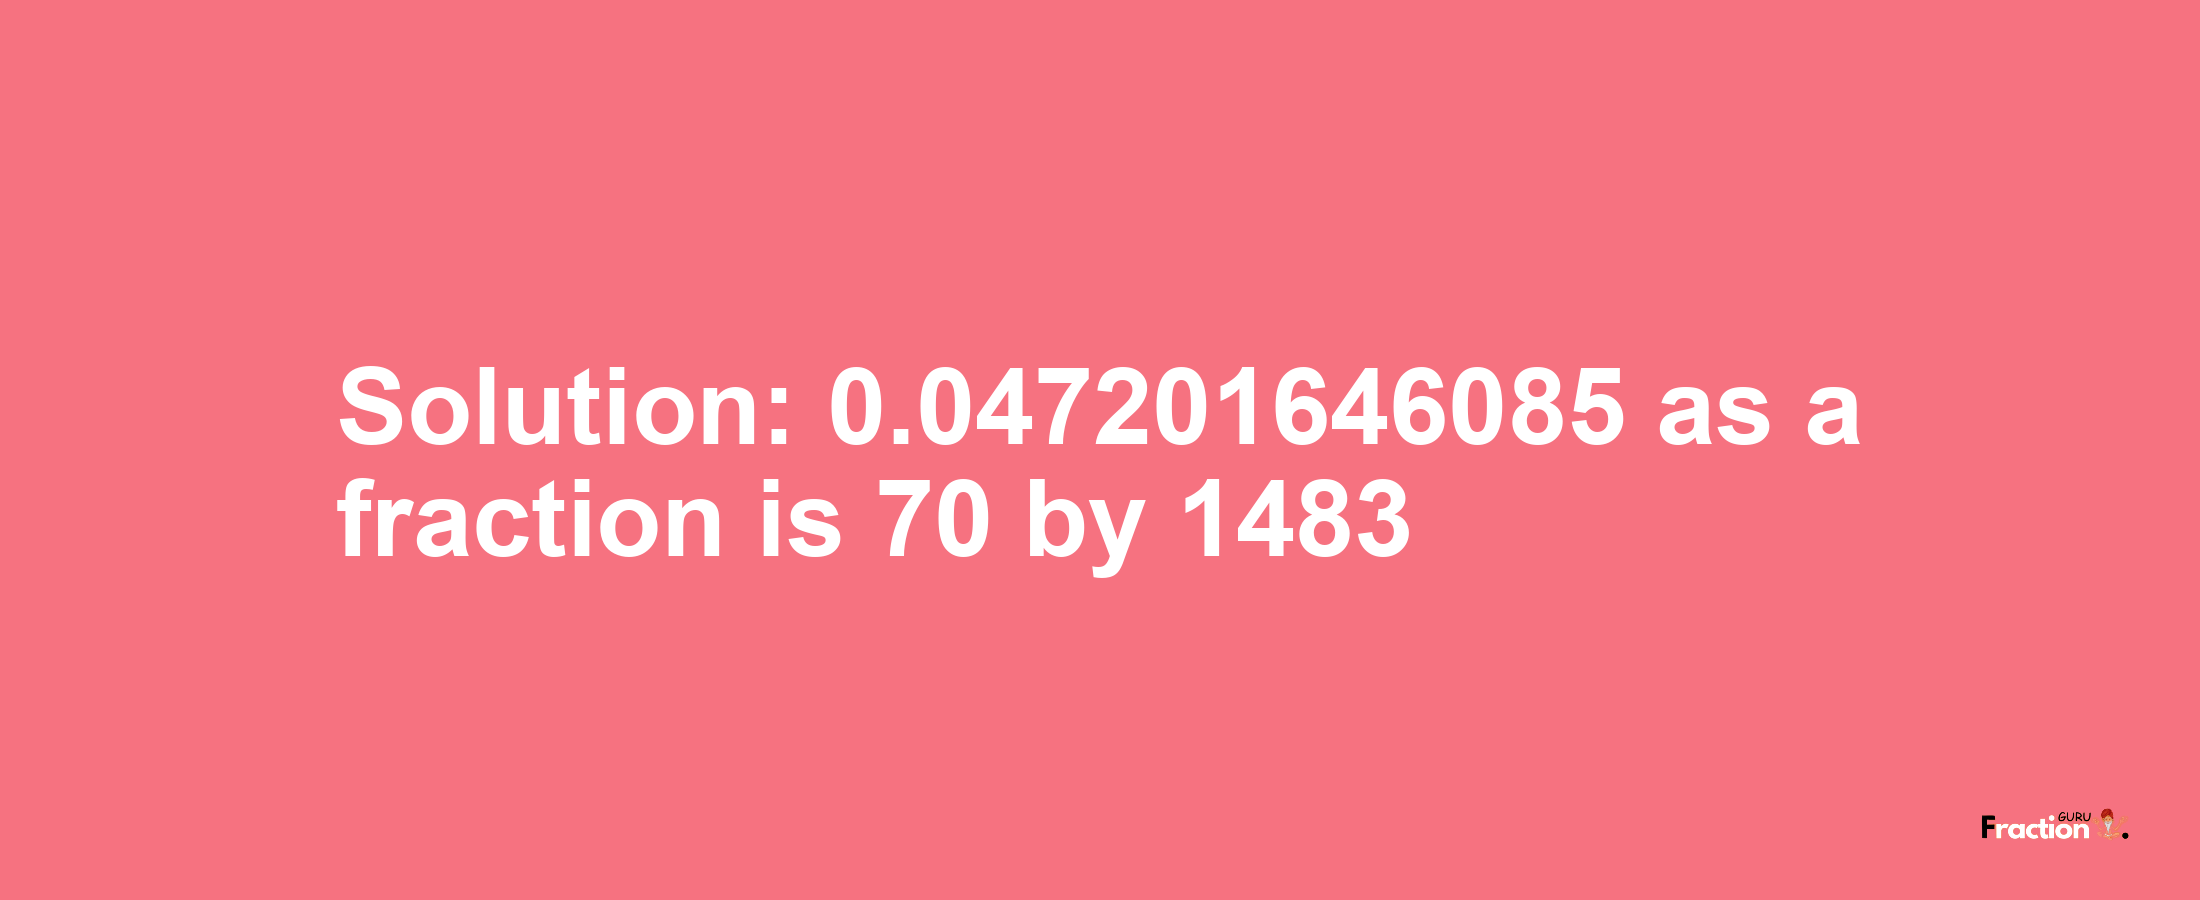 Solution:0.047201646085 as a fraction is 70/1483